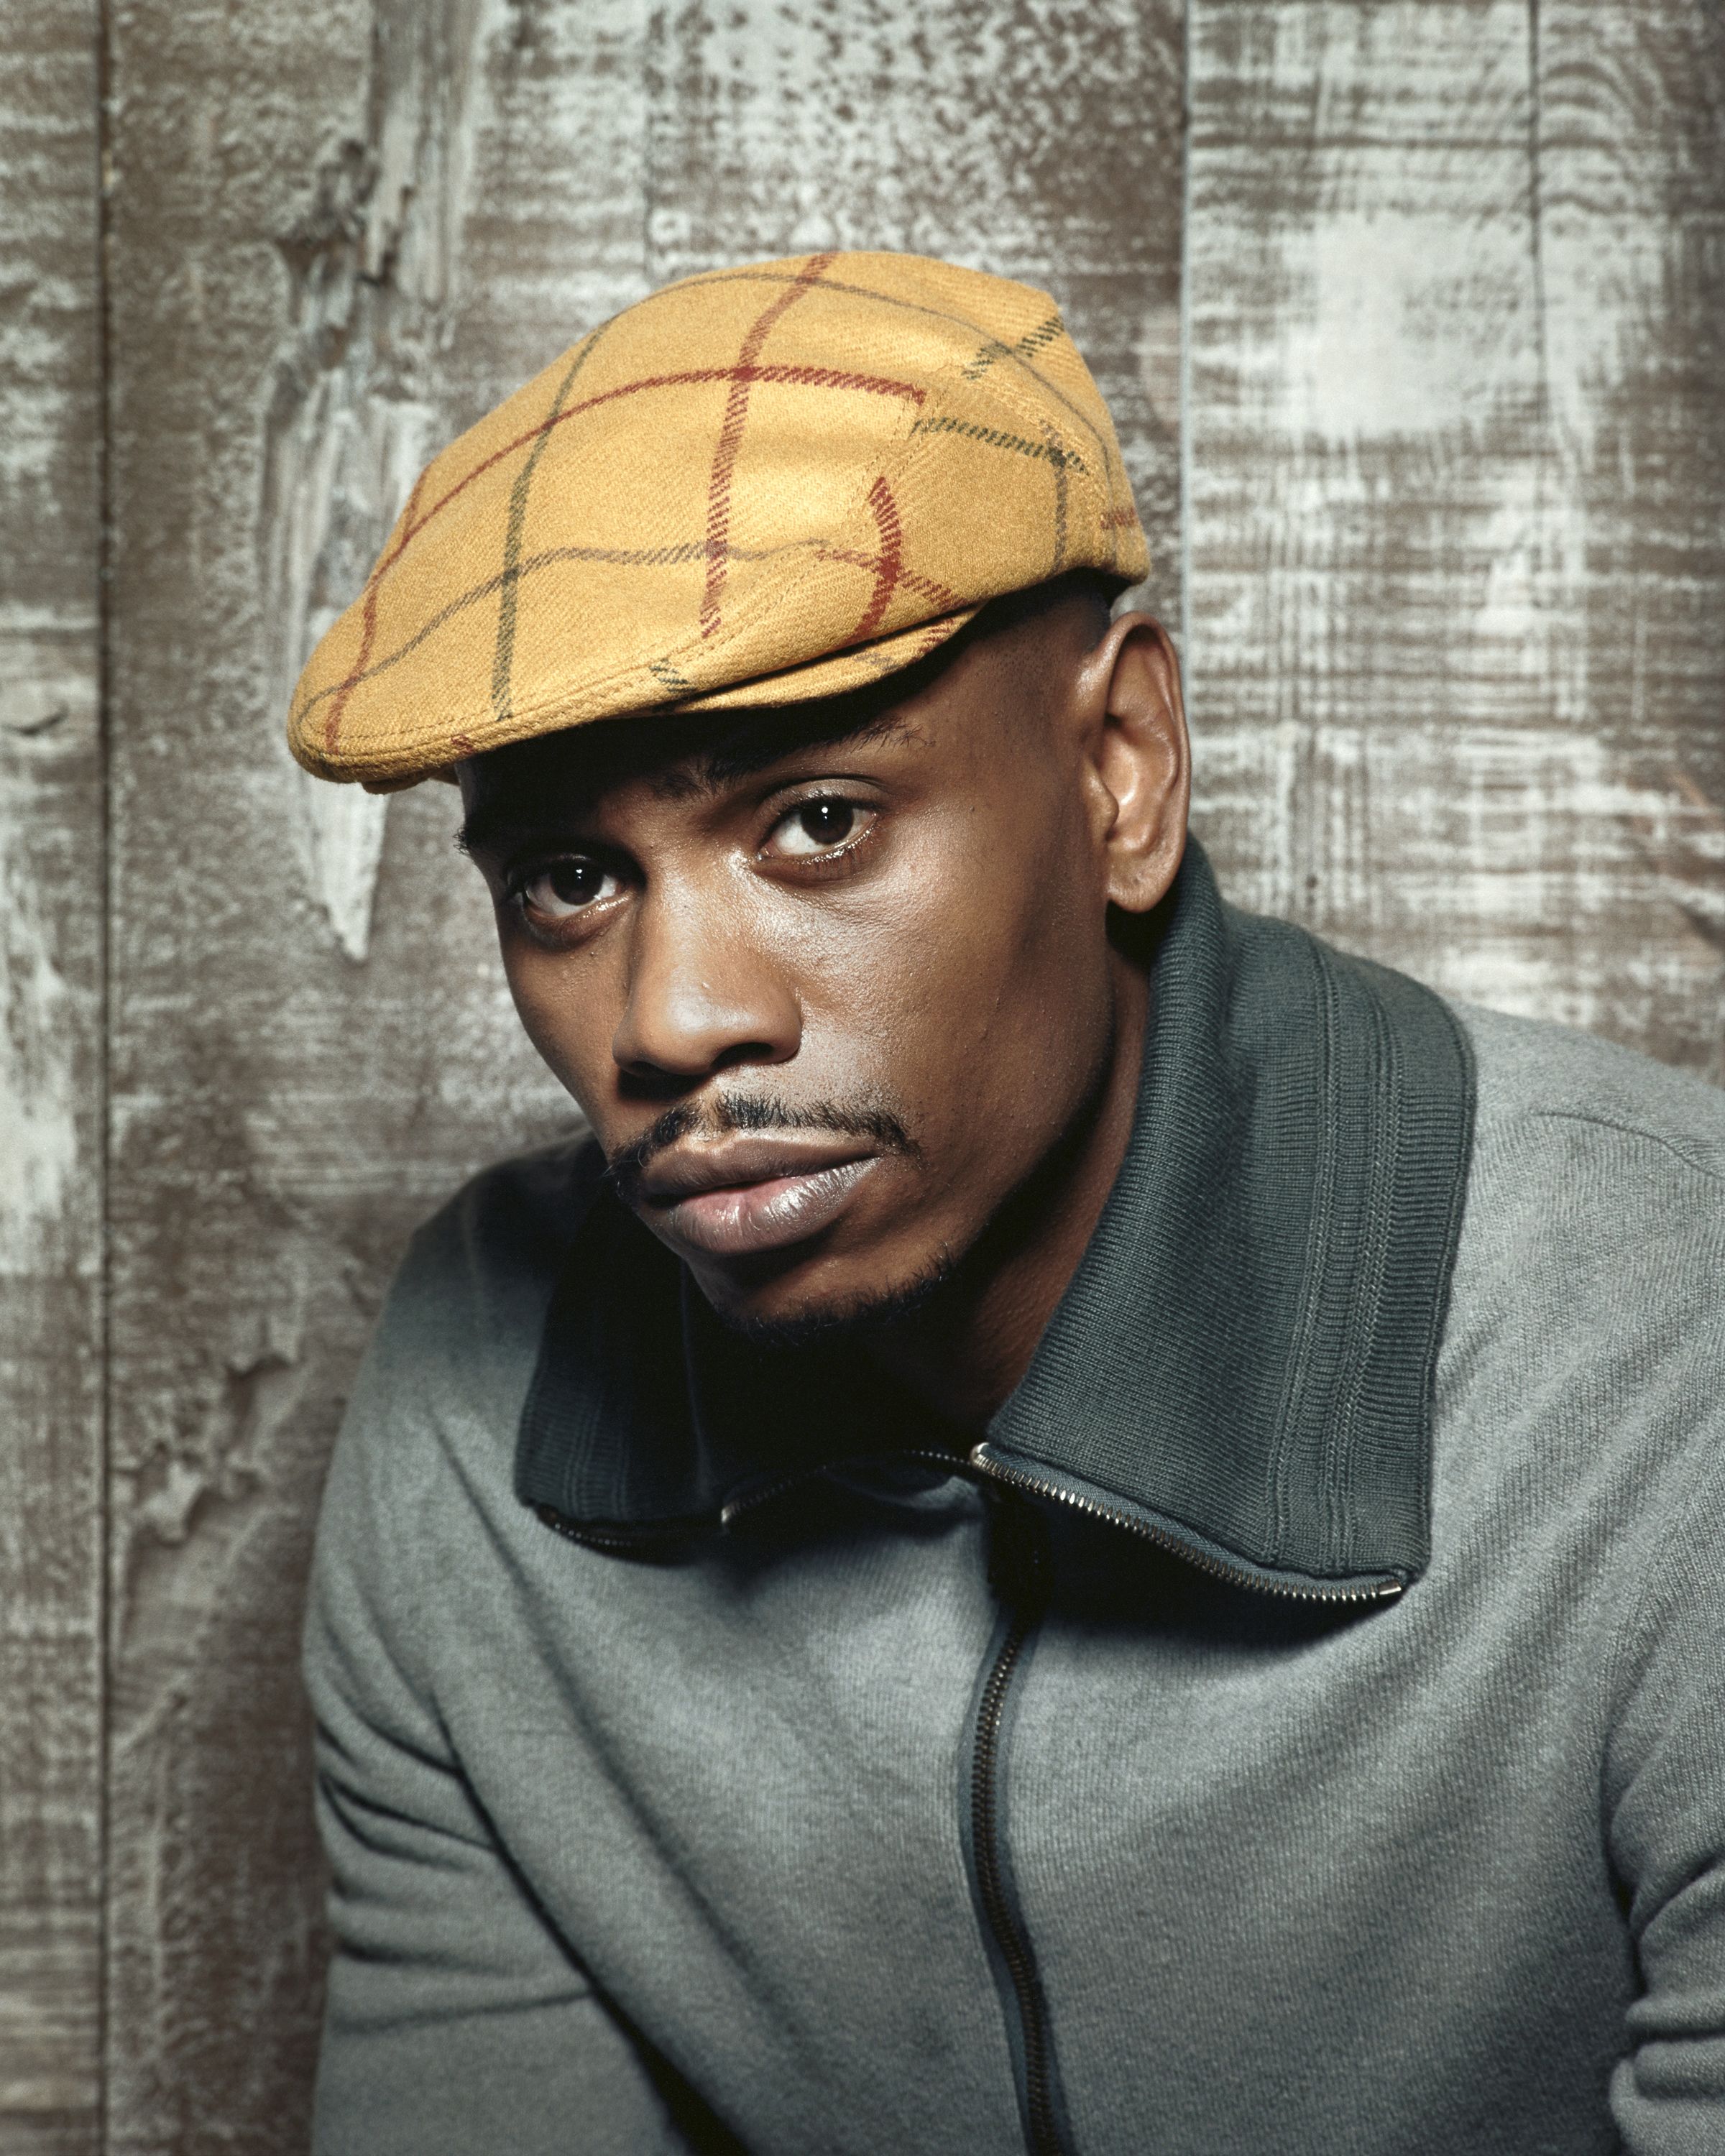 Dave Chappelle Wallpapers - Wallpaper Cave.